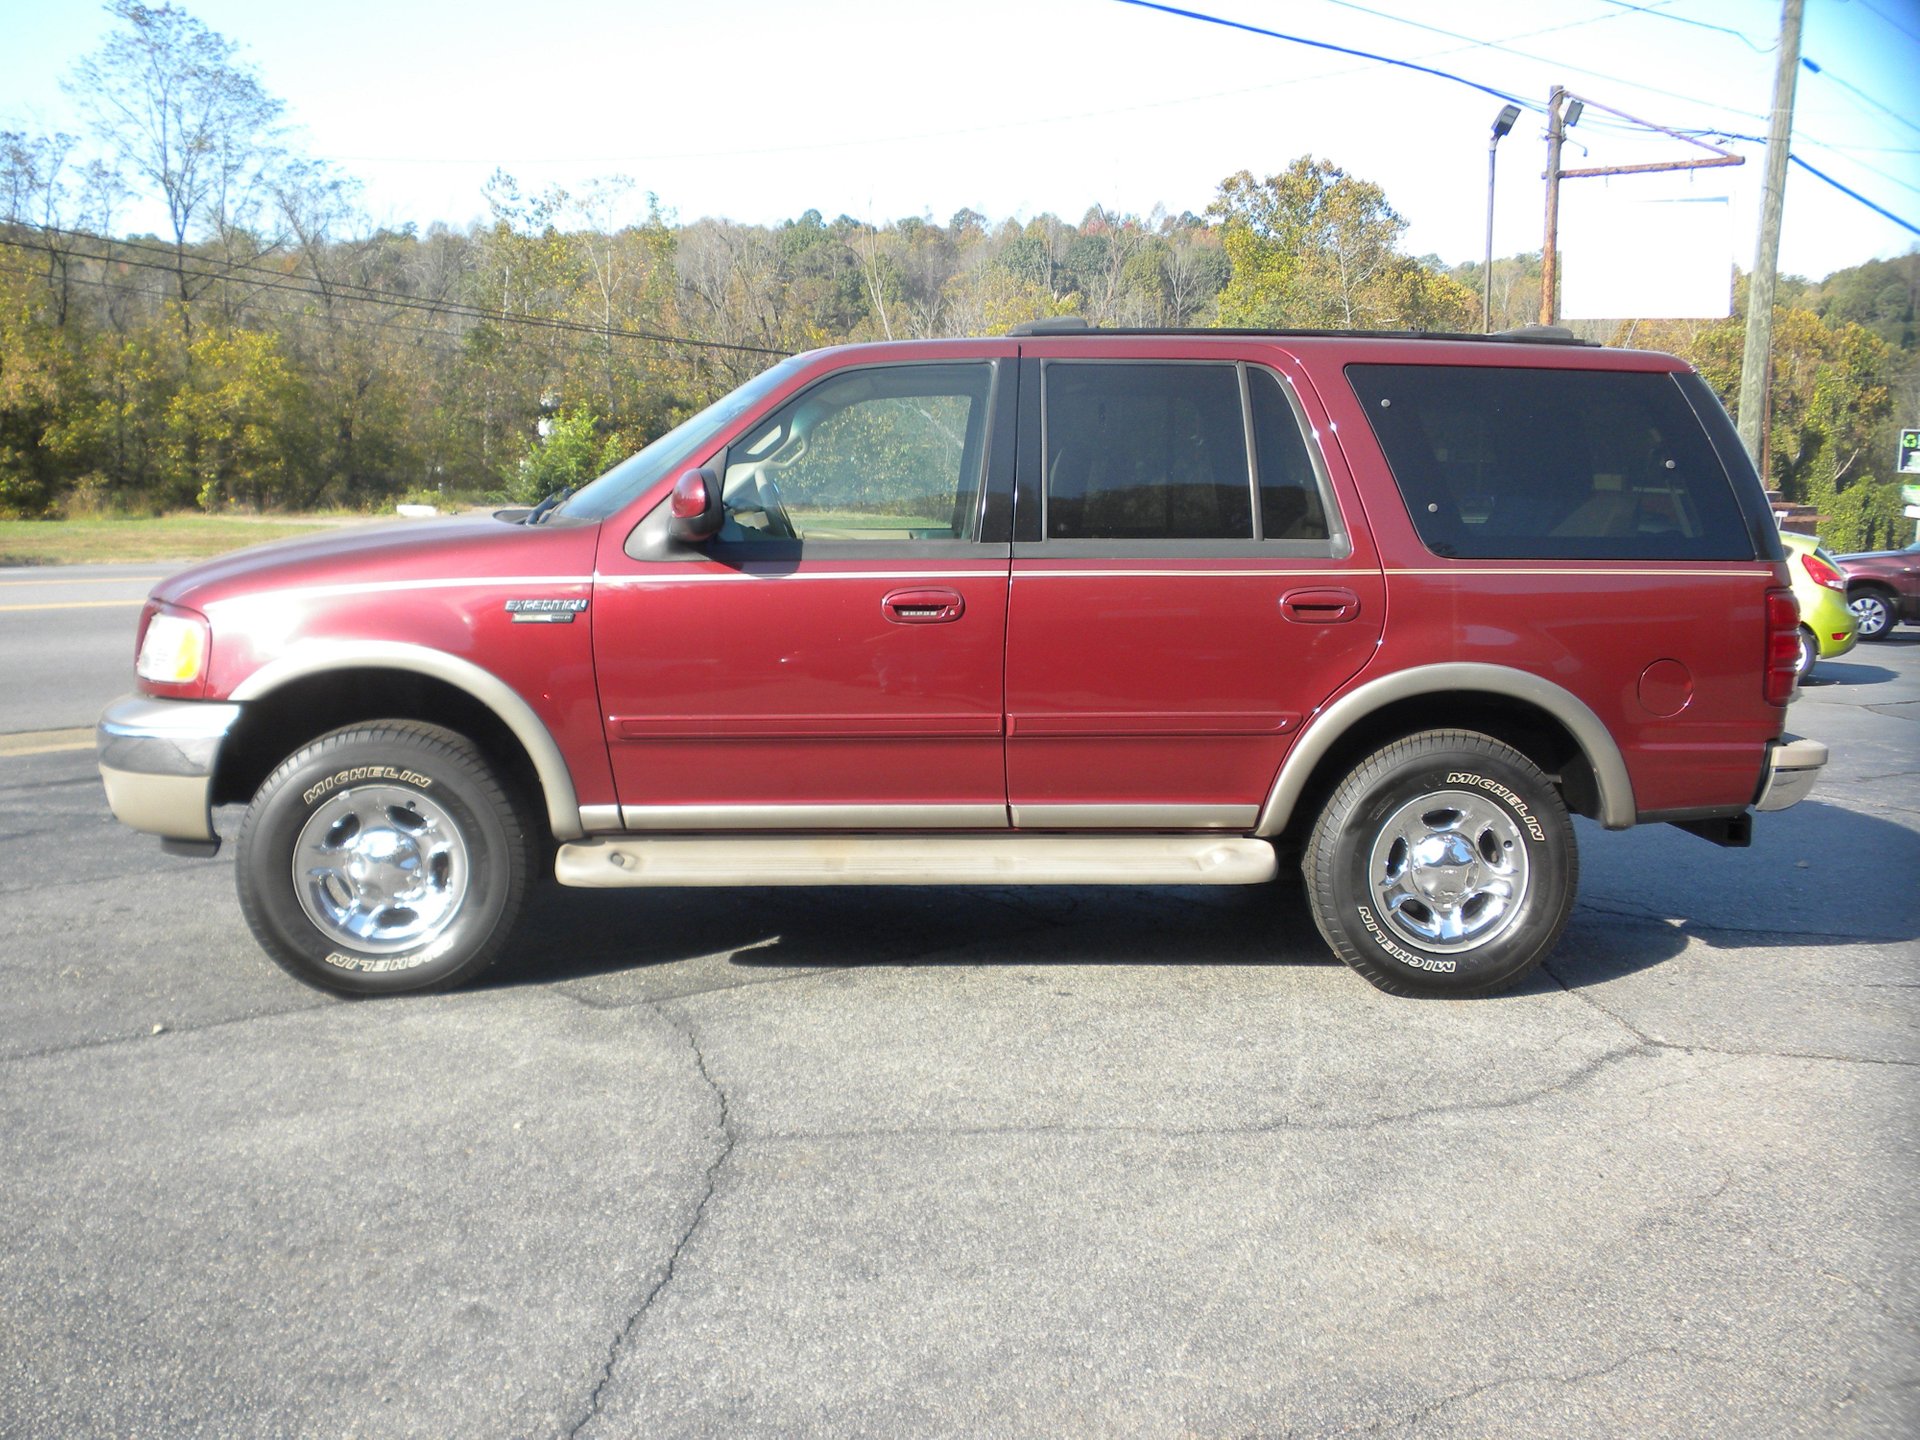 2000 Ford Expedition | GAA Classic Cars